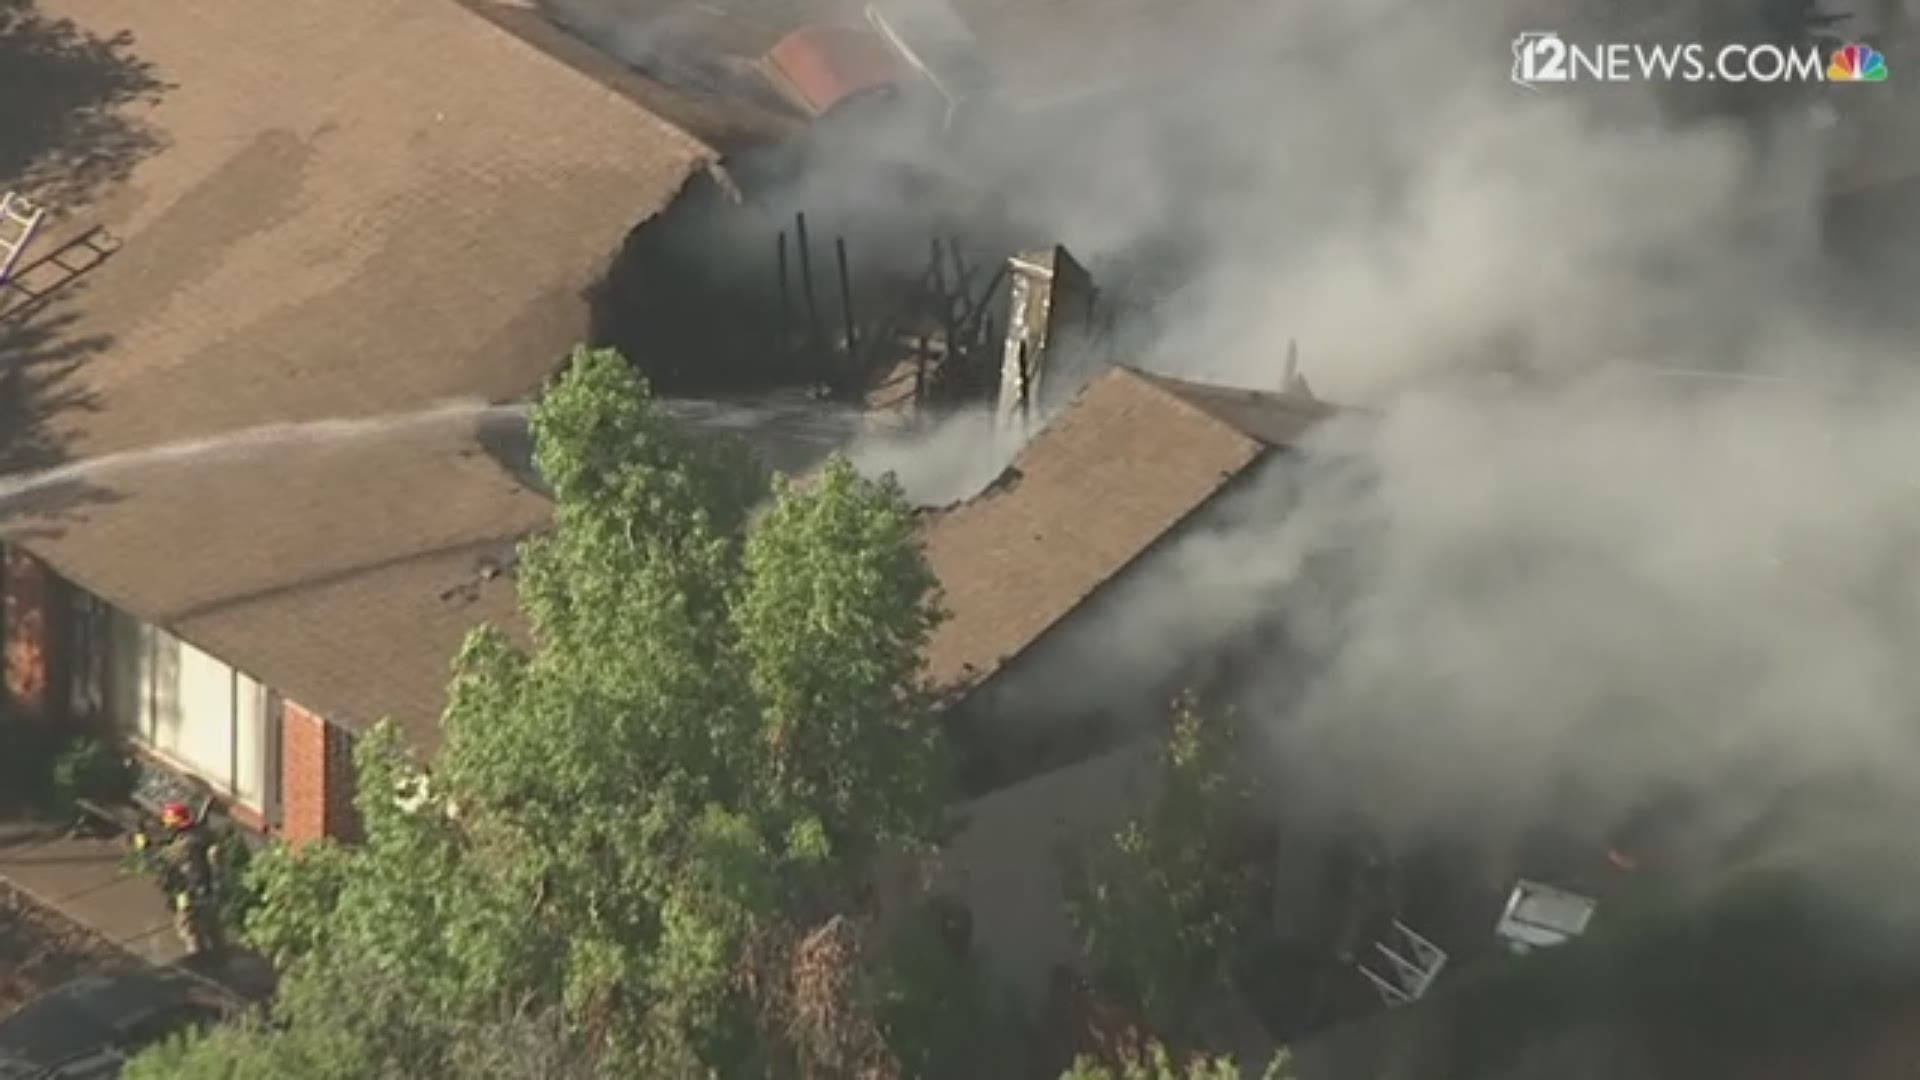 Tempe, Mesa and Chandler fire crews responded to a house fire that displaced 3 people Friday morning near Guadalupe Road and McClintock Drive in Tempe.